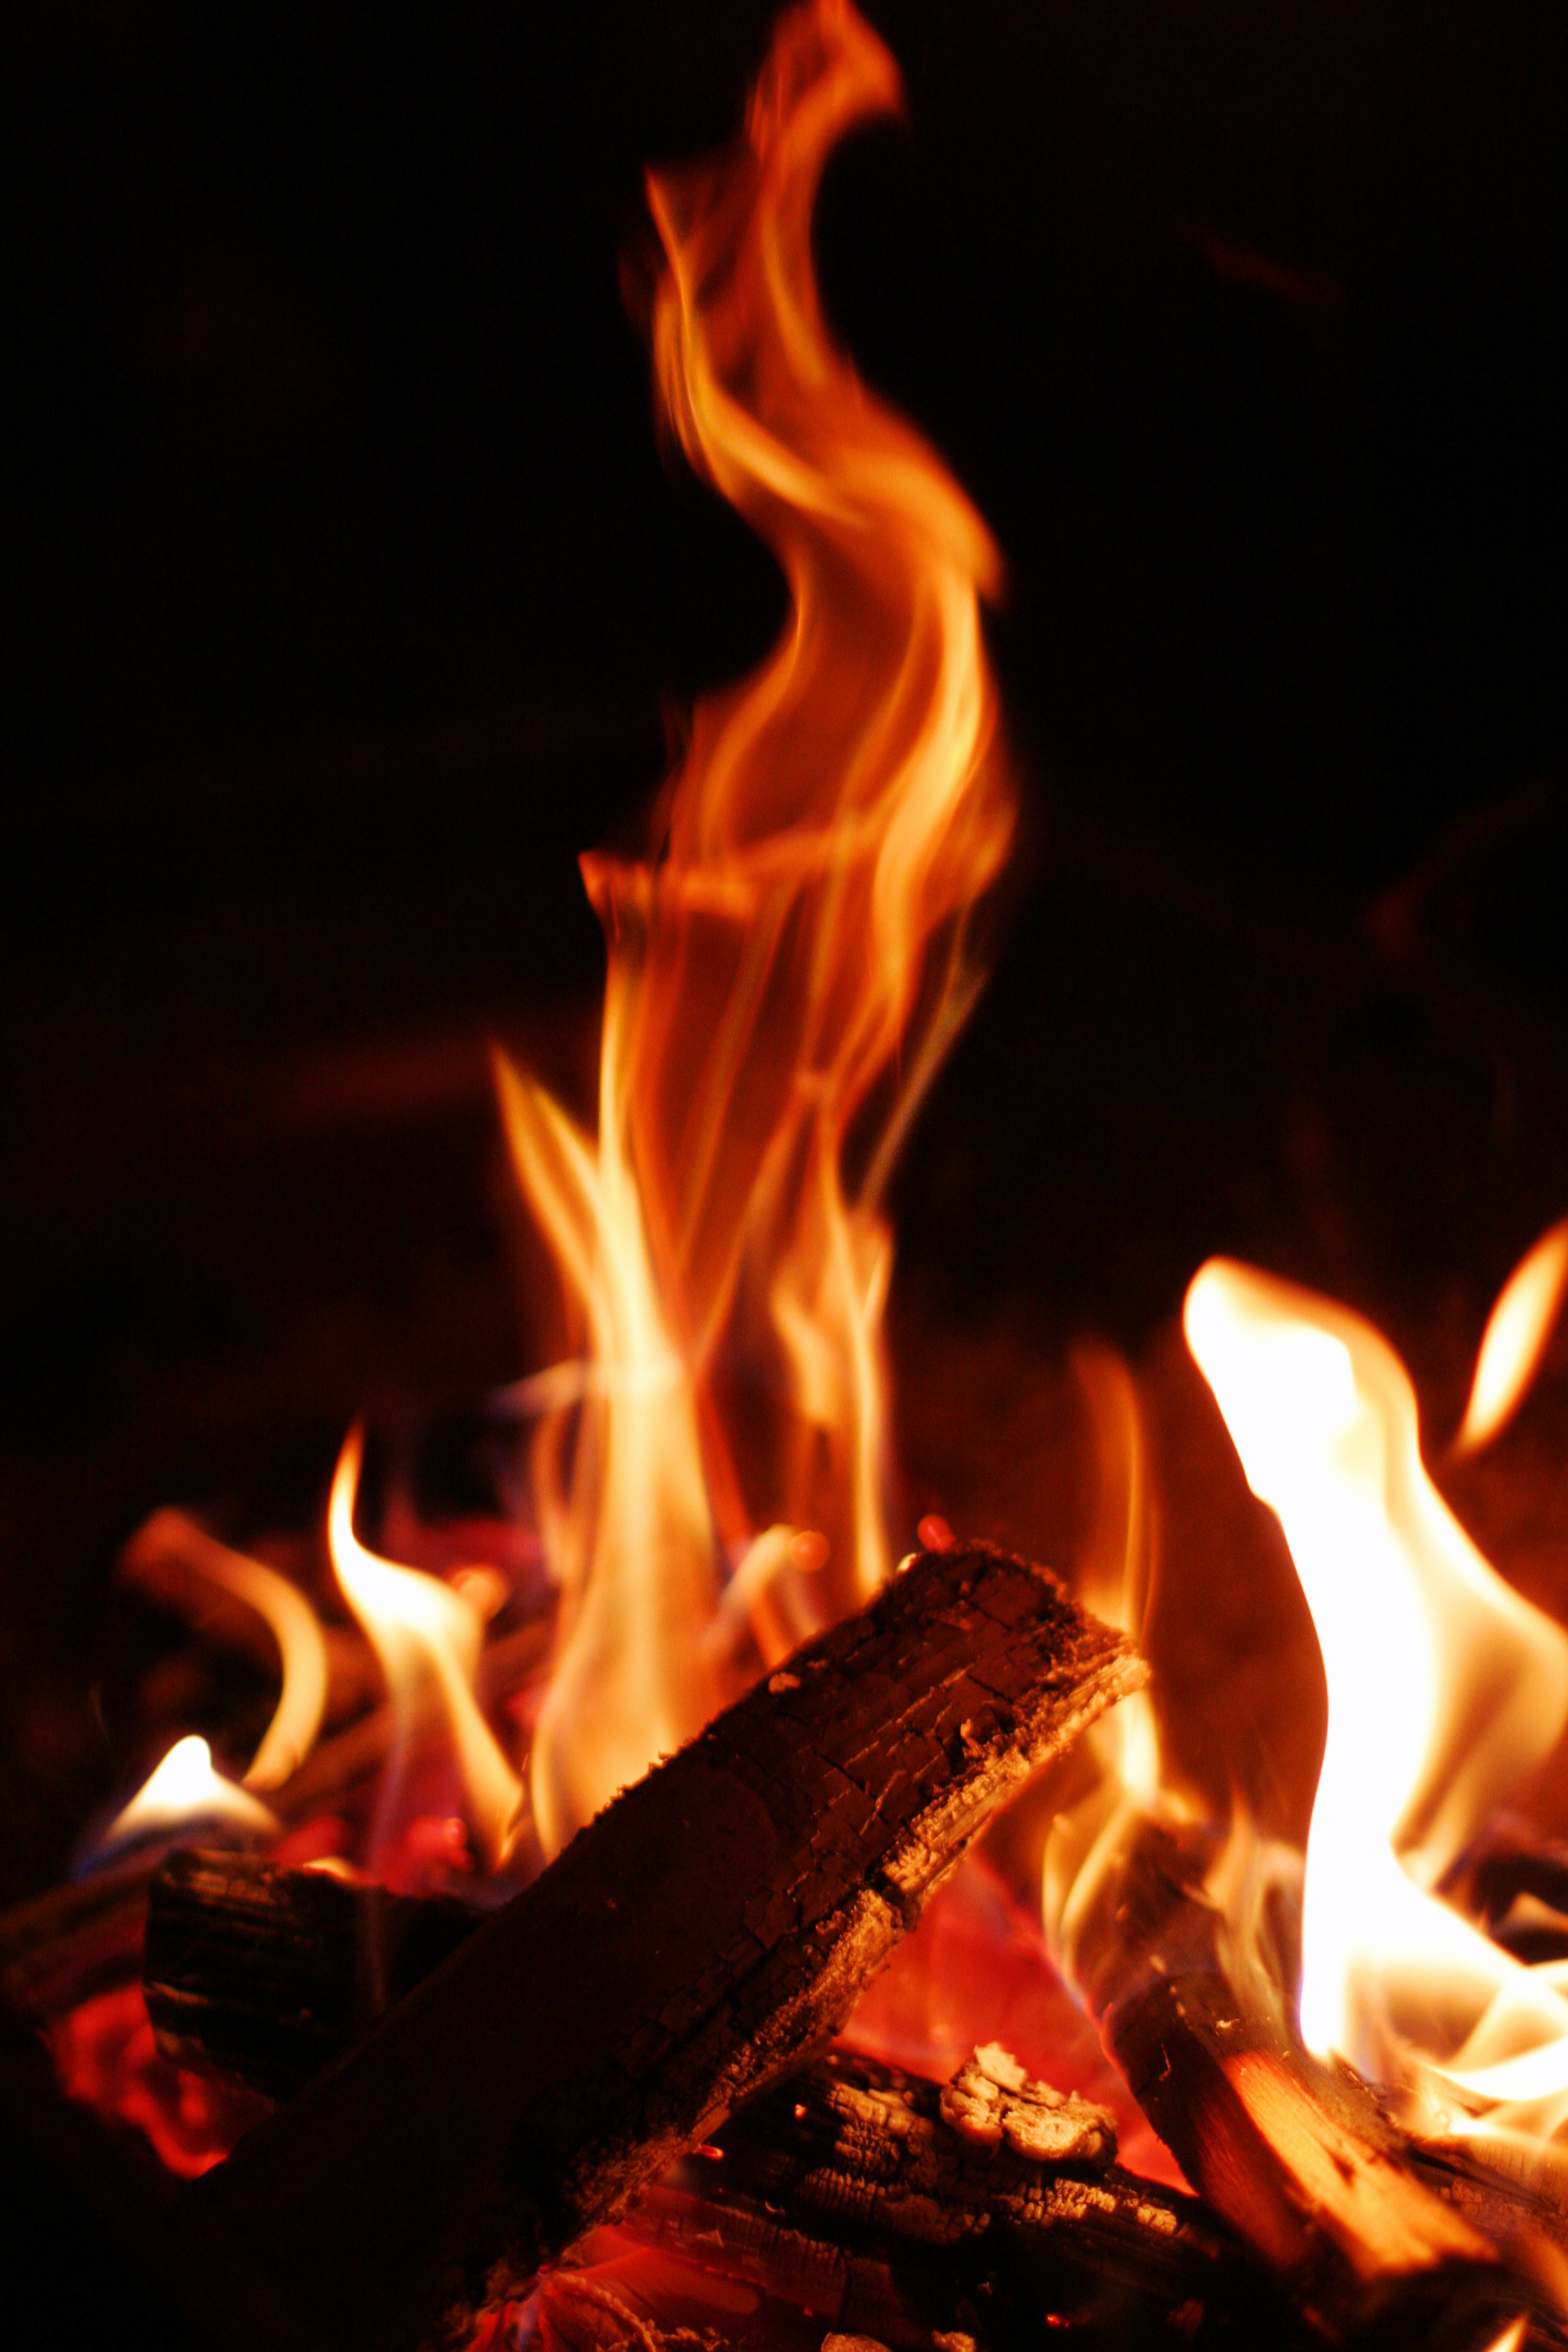 photo,material,free,landscape,picture,stock photo,Creative Commons,Roar of flames, bonfire, fire, firewood, burning